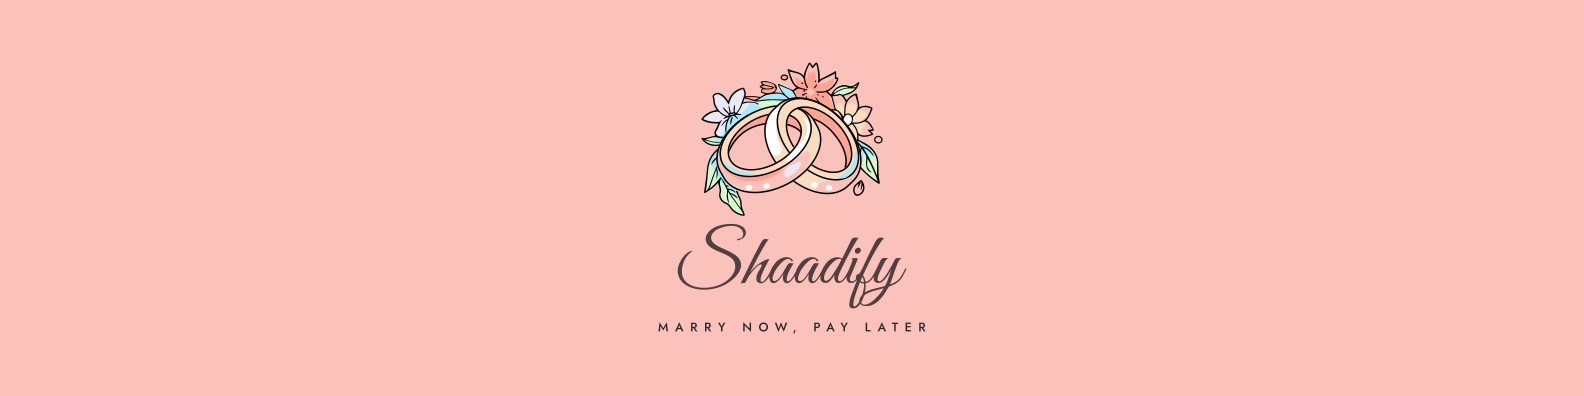 Wedding Finance: Fulfilling Dream Weddings Without Financial Constraints with Shaadify